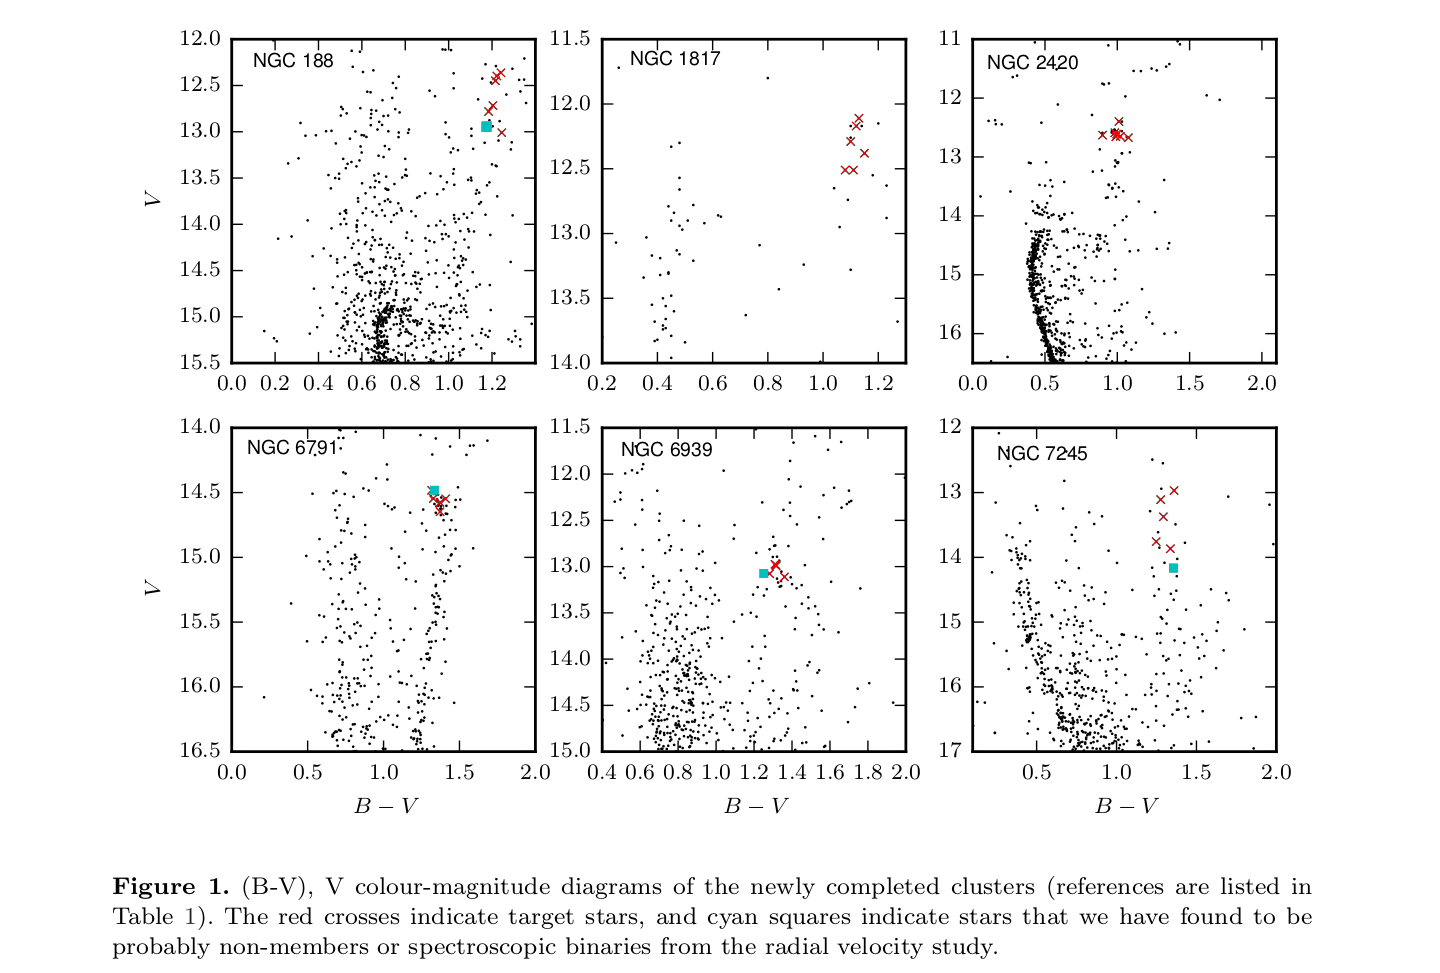 OCCASO - II. Physical parameters and Fe abundances of red clump stars in 18 open clusters image